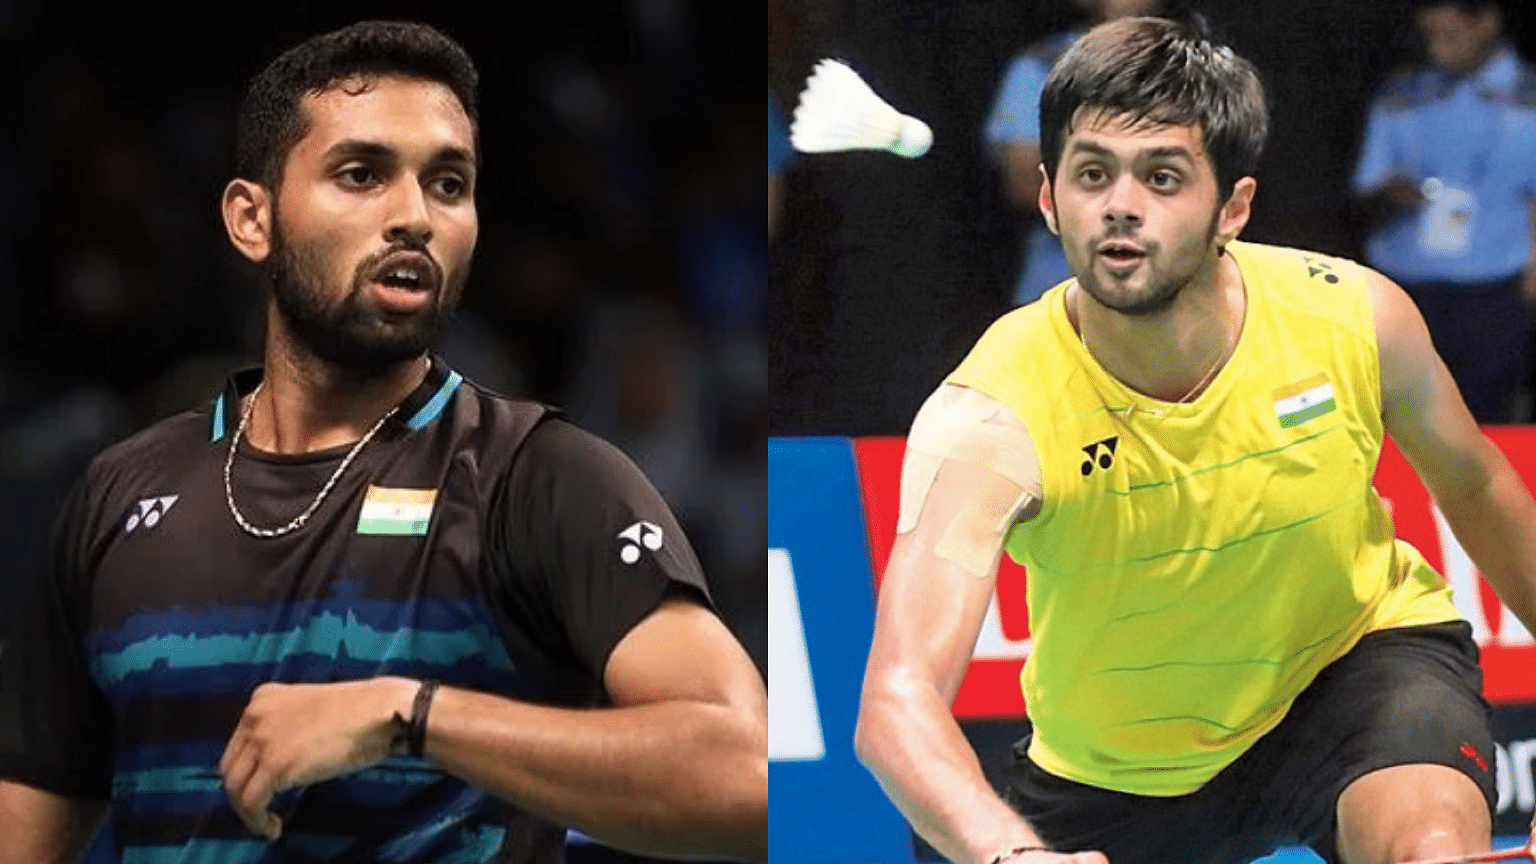 Shuttlers HS Prannoy (left) and B Sai Praneeth blamed administrative goof-ups for preventing them from participation at the Asia Badminton Championship.